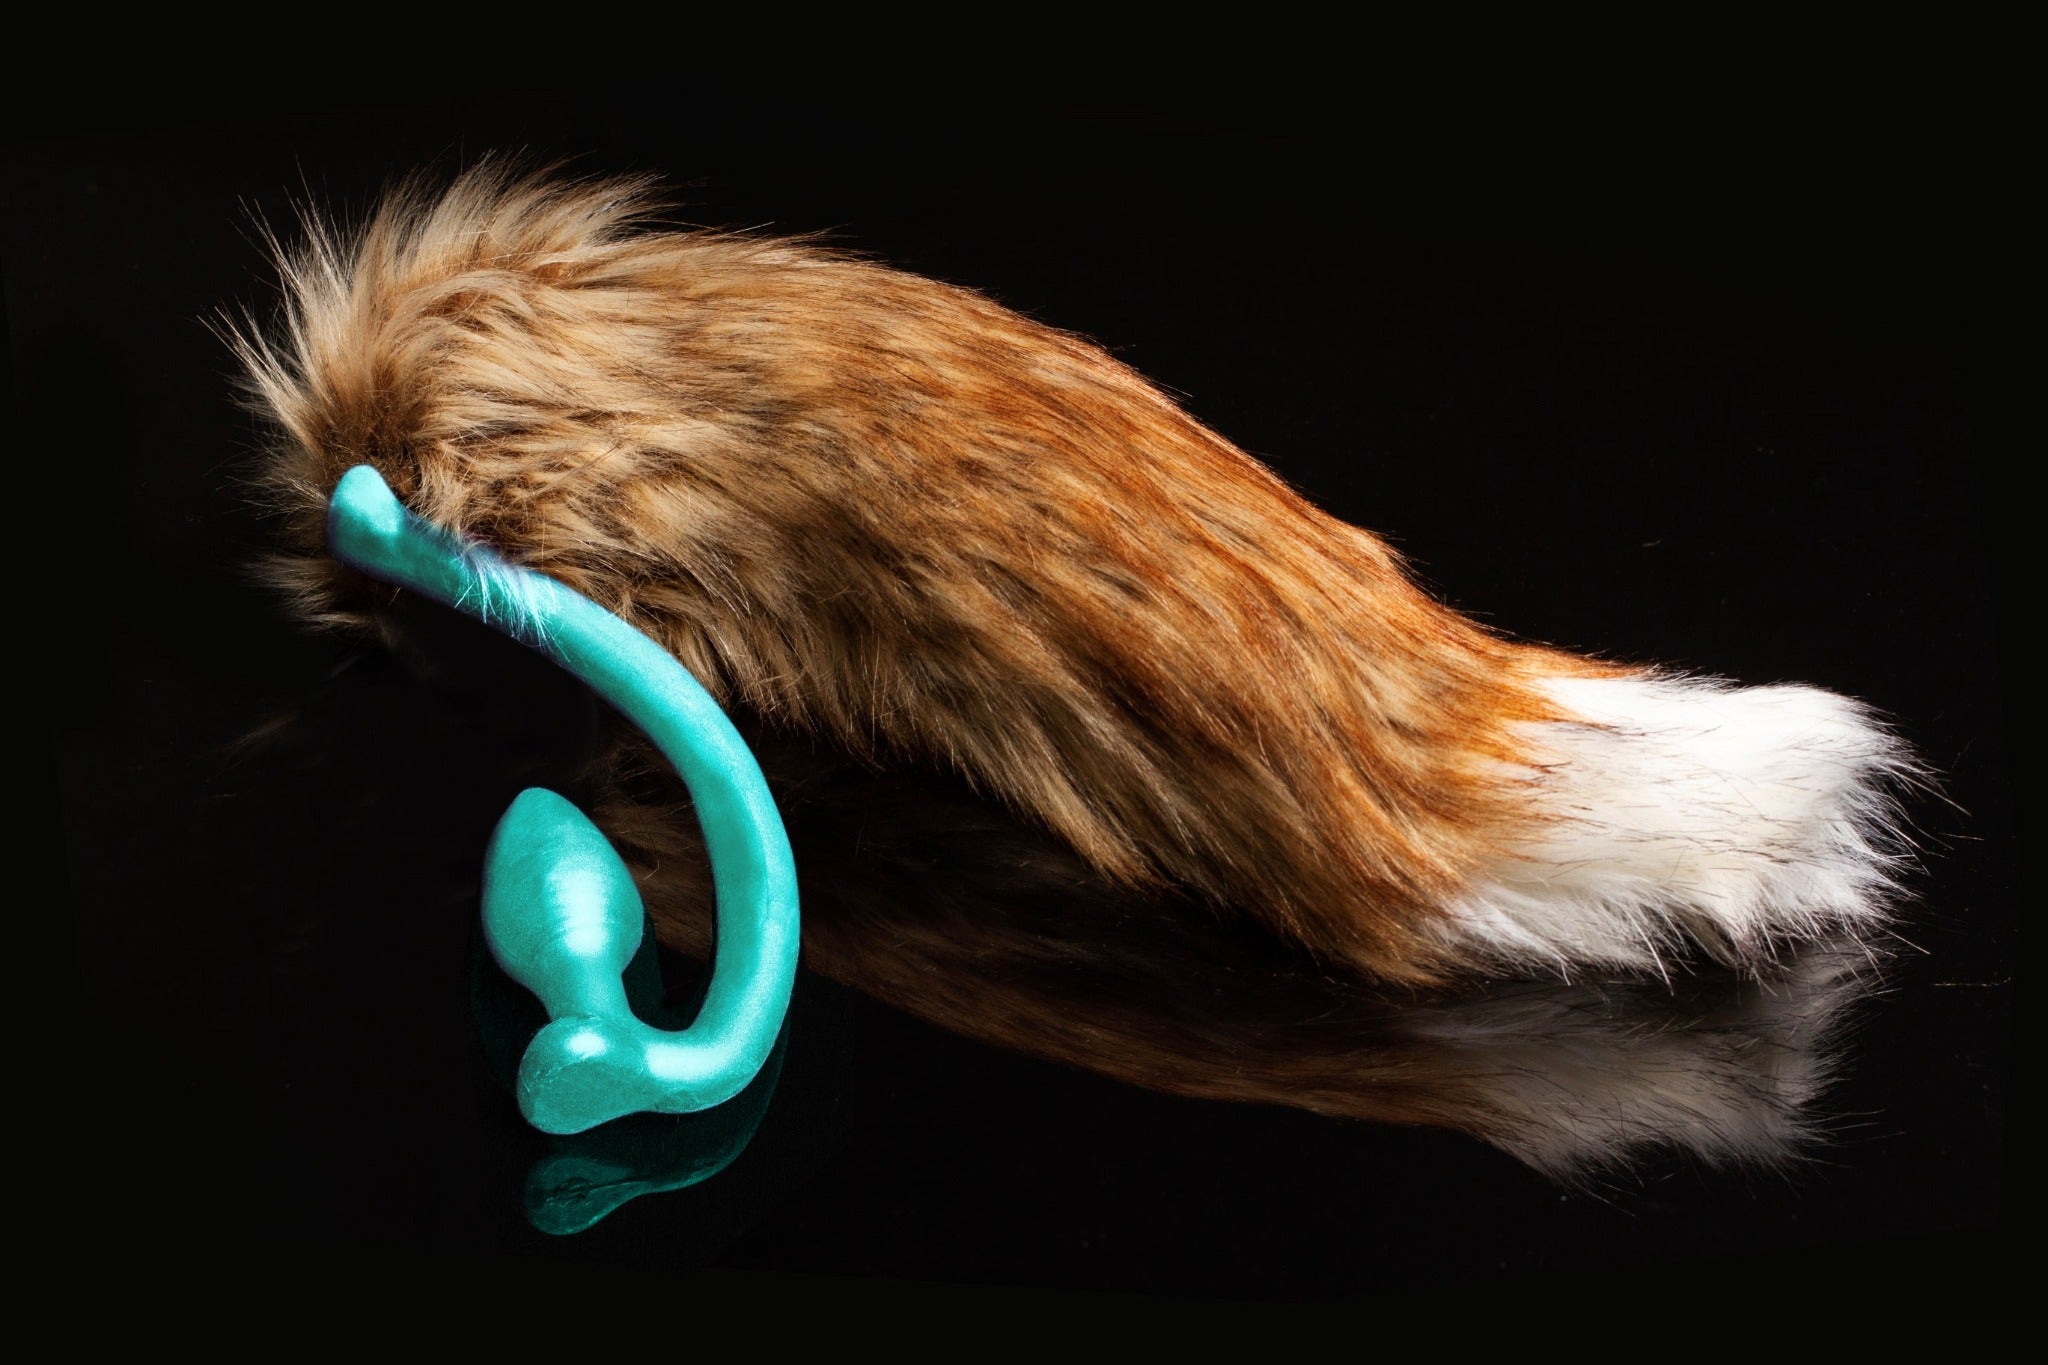 Red Fox tail butt plug made of silicone and faux fur, but the plug is hooked so when worn, the tail sits at the bottom of the lumbar area. It’s laying flat on a black background.